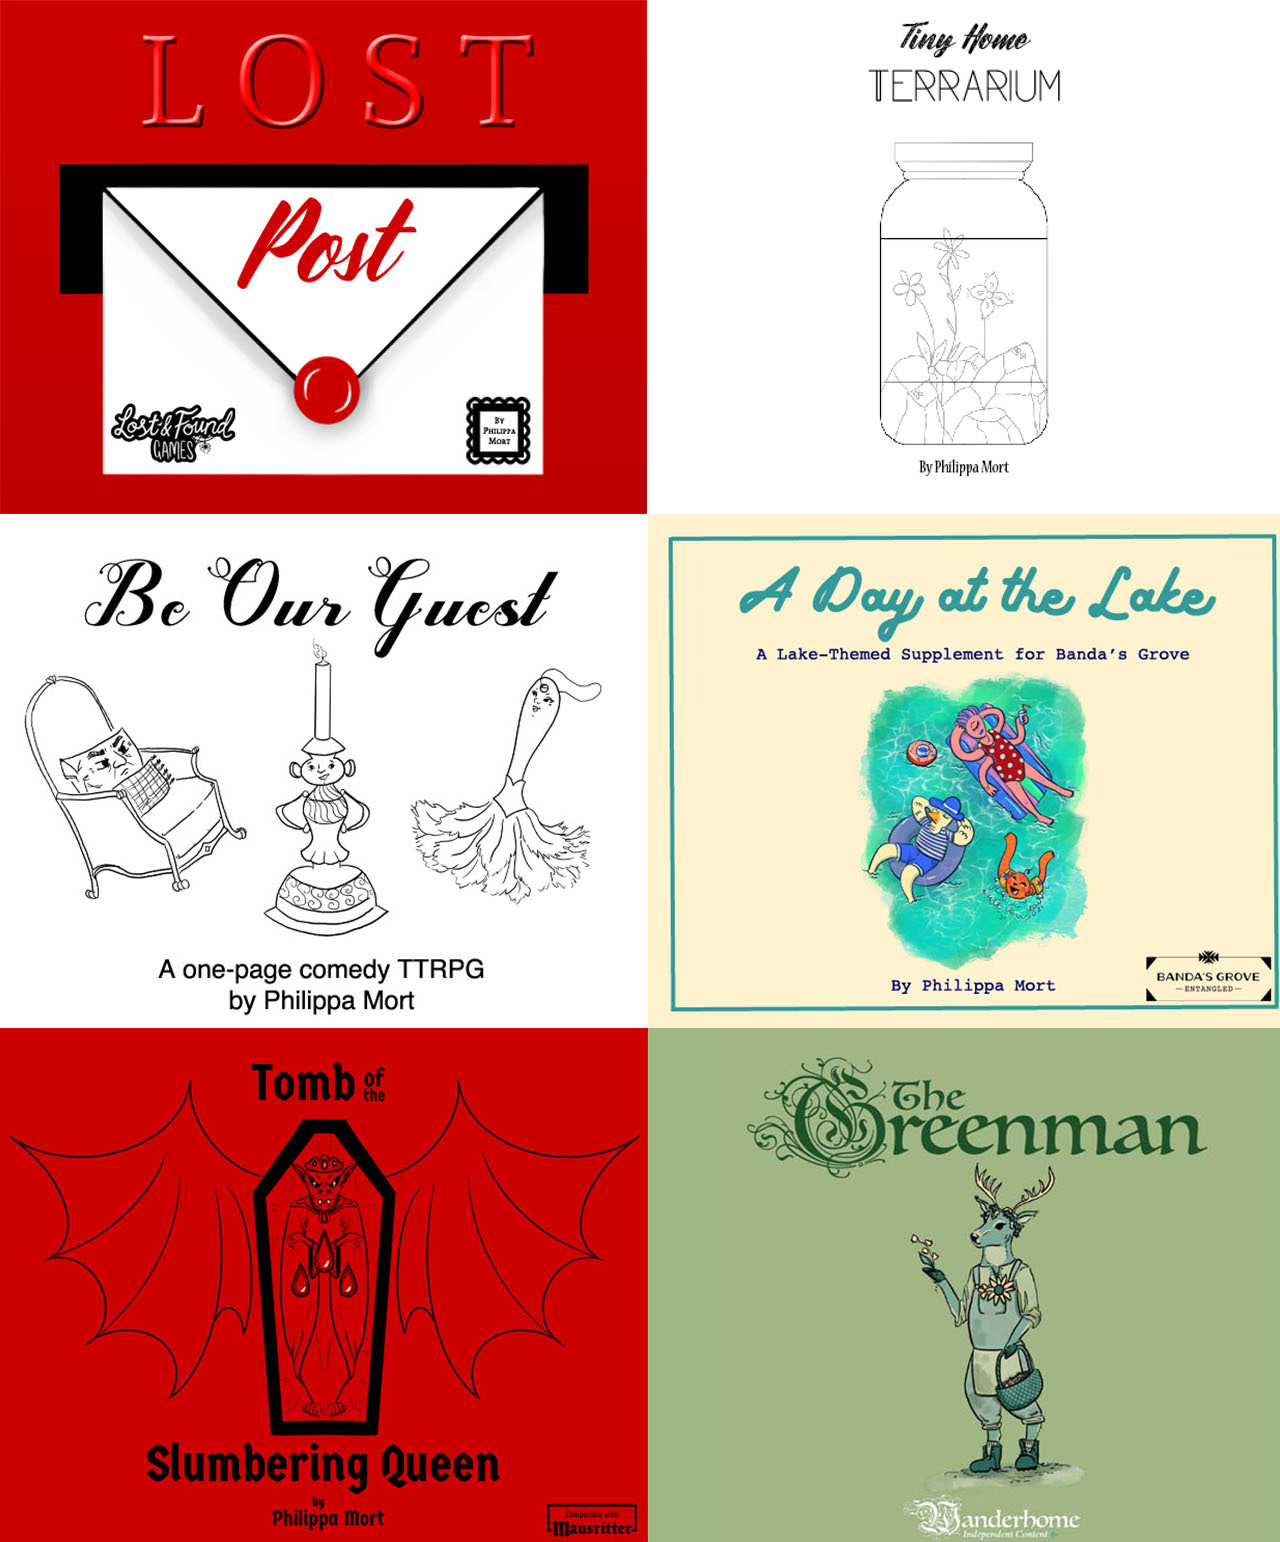 Graphic showing 6 of the games Philippa has made on itch. From top left clockwise, are the covers for Lost Post, Tiny Home Terrarium, Be Our Guest, A Day at the Lake, Tomb of the Slumbering Queen, and The Greenman.